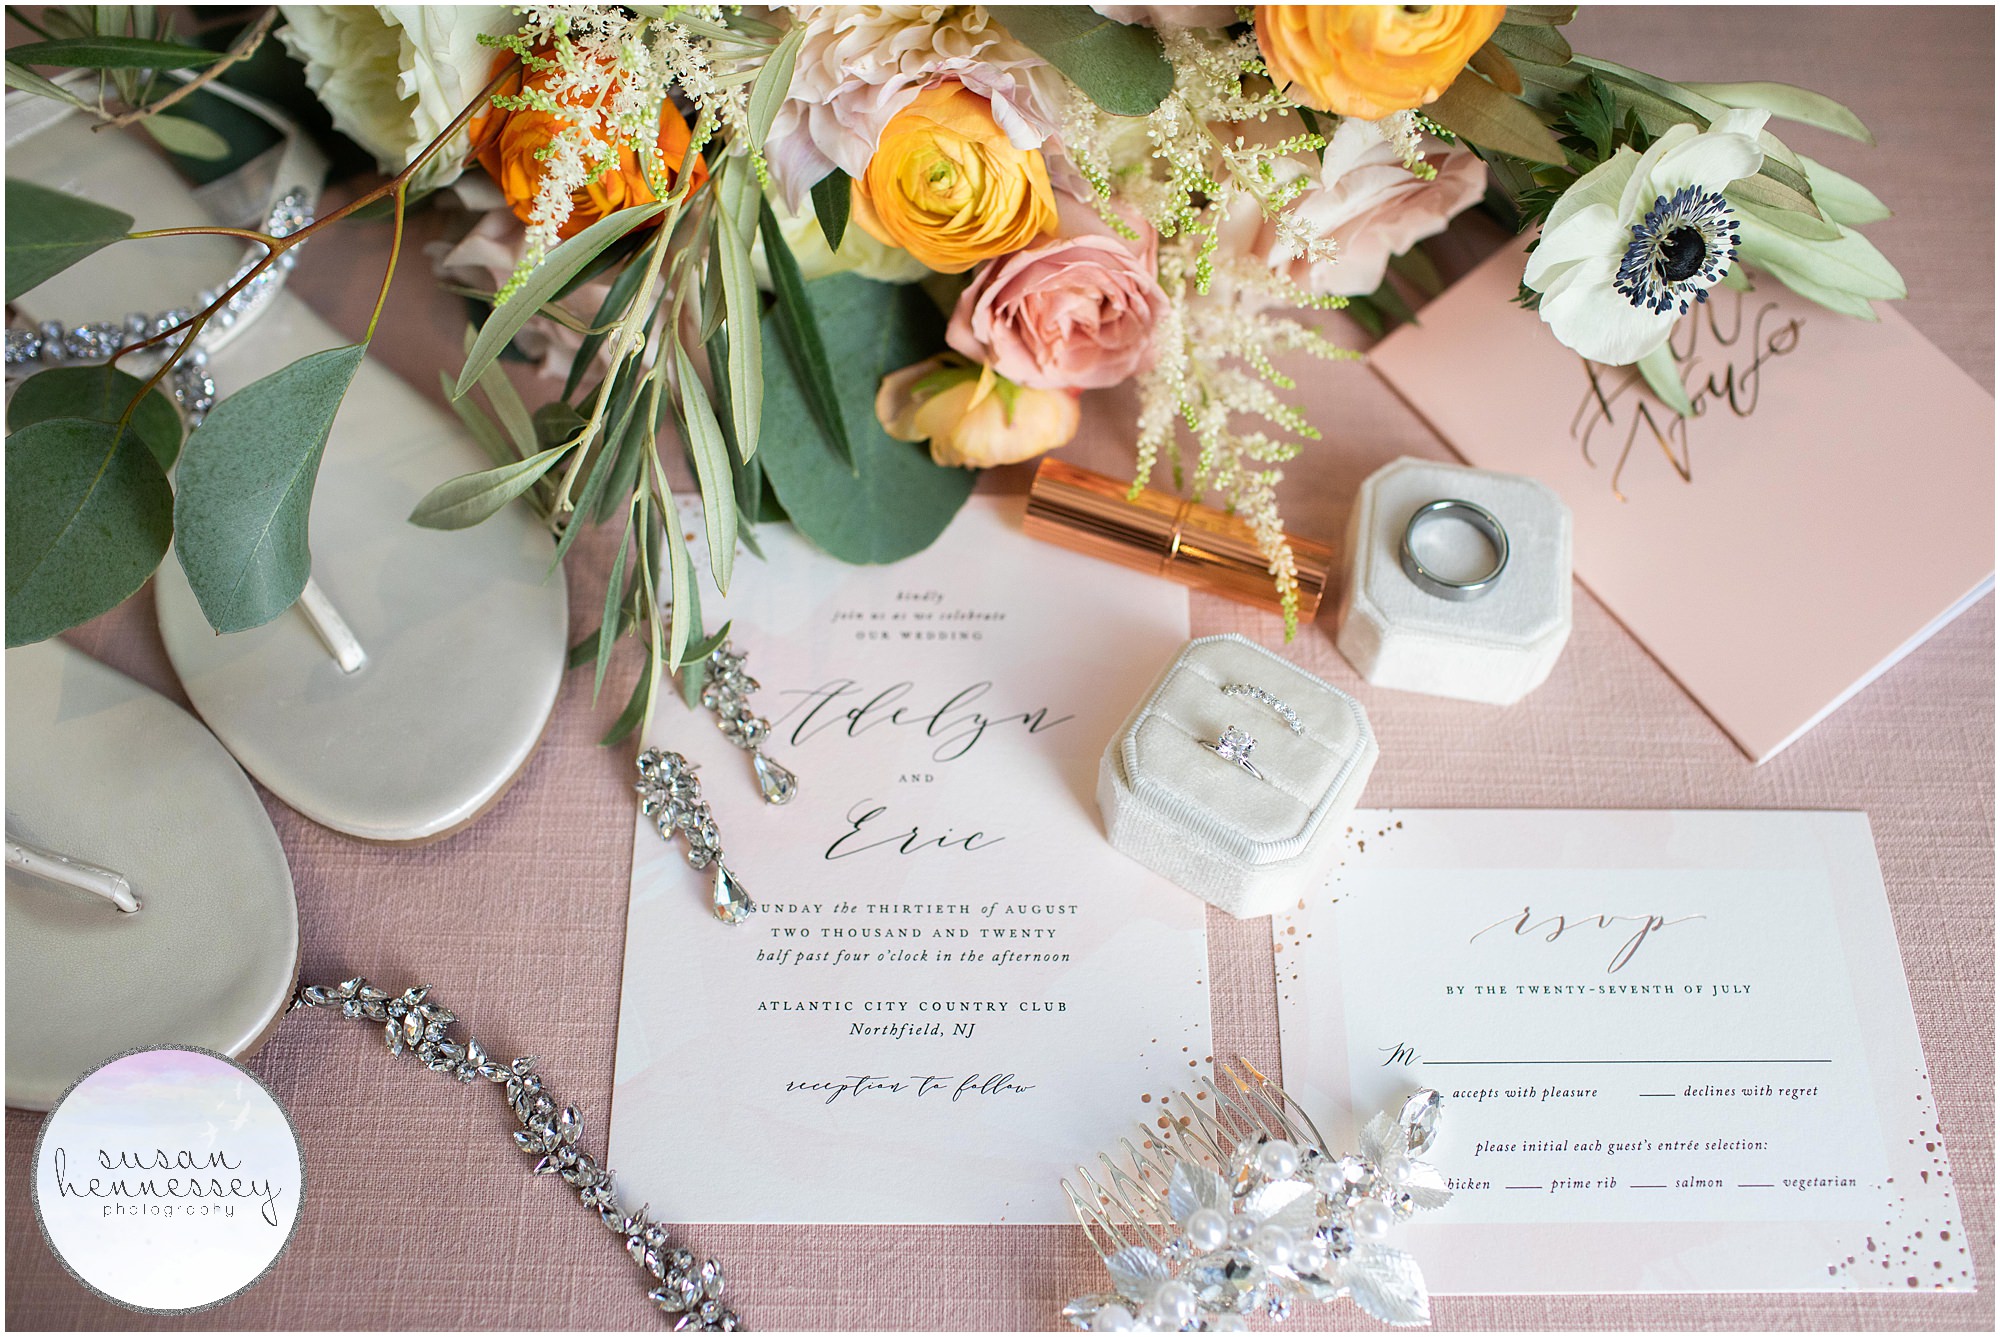 Bridal details at classic and romantic wedding